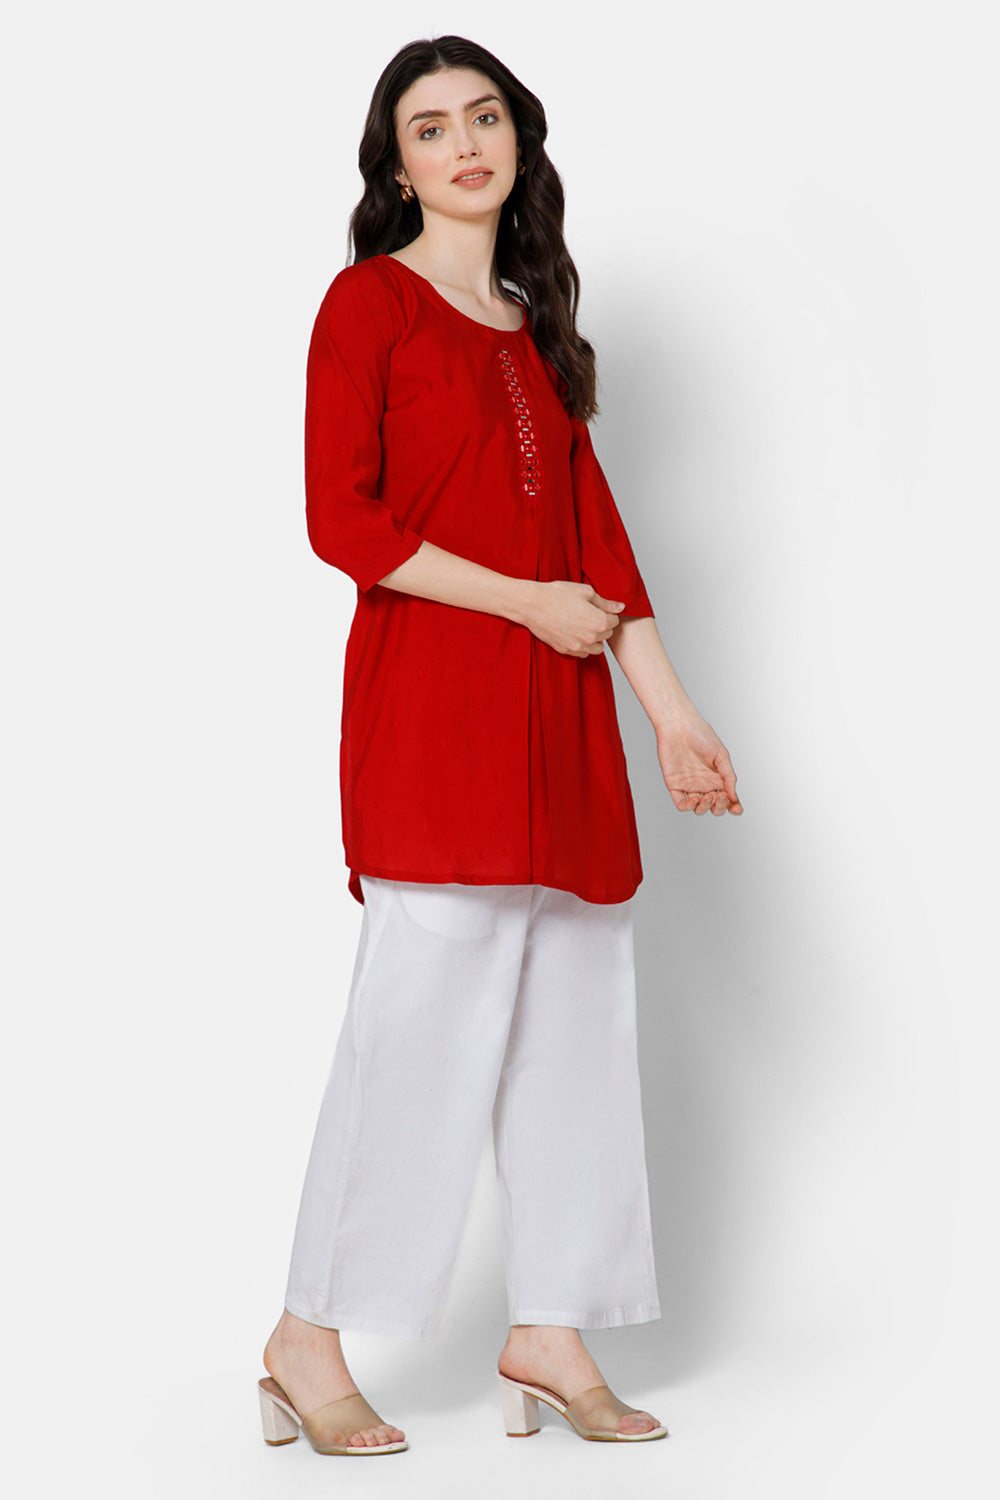 Mythri Women's Casual Tops with Mirror Work At The Center Front  - Red - E022